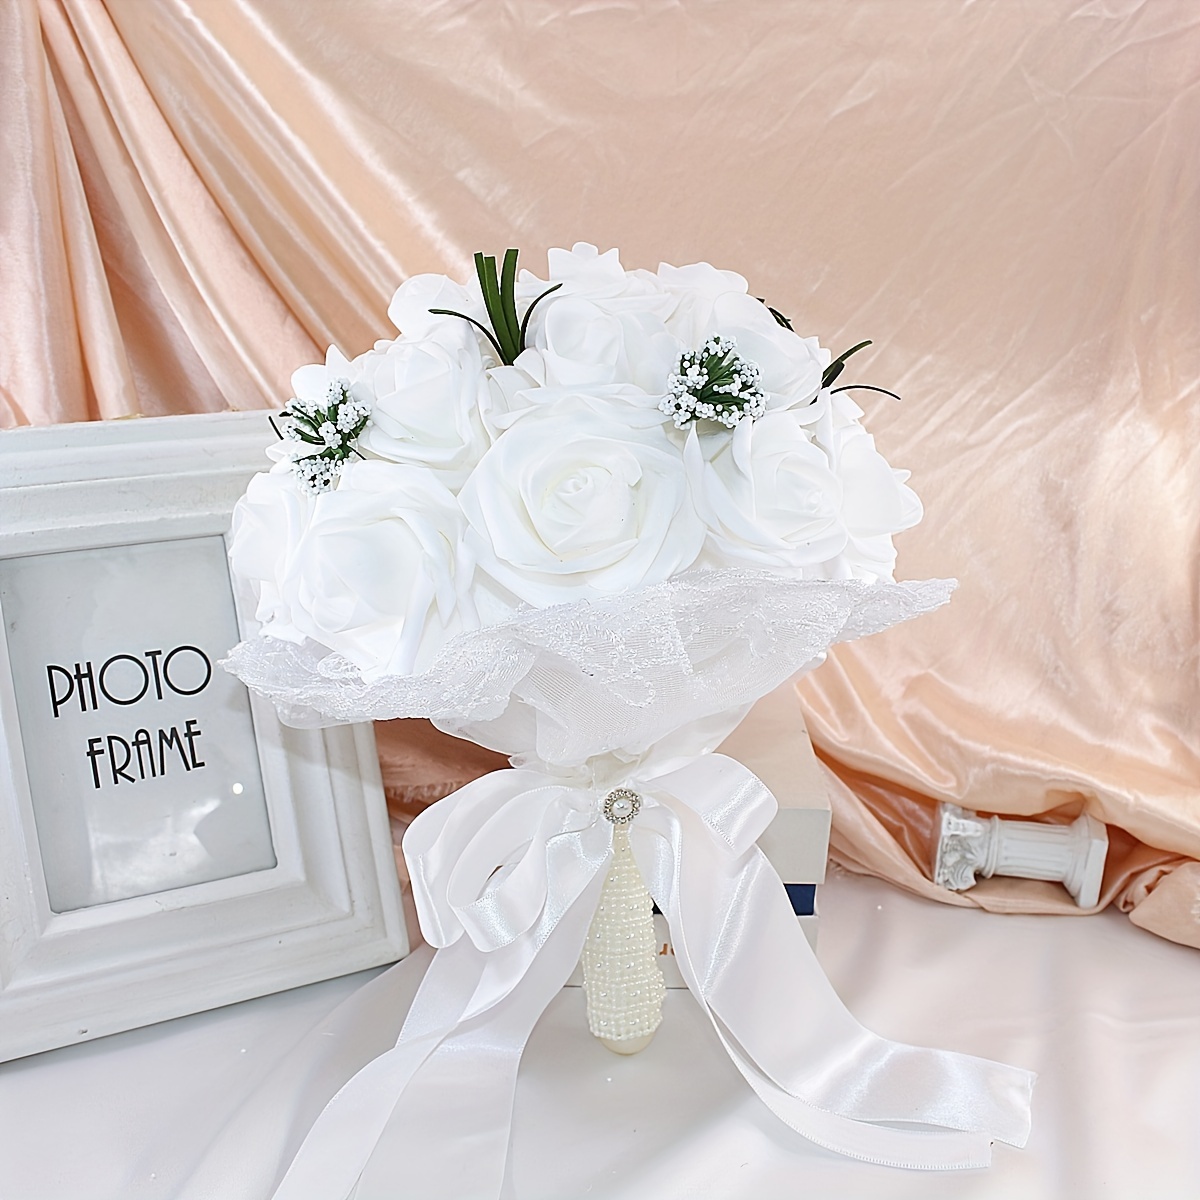 Pearl Wedding Decorations: Where to Buy & What You Need